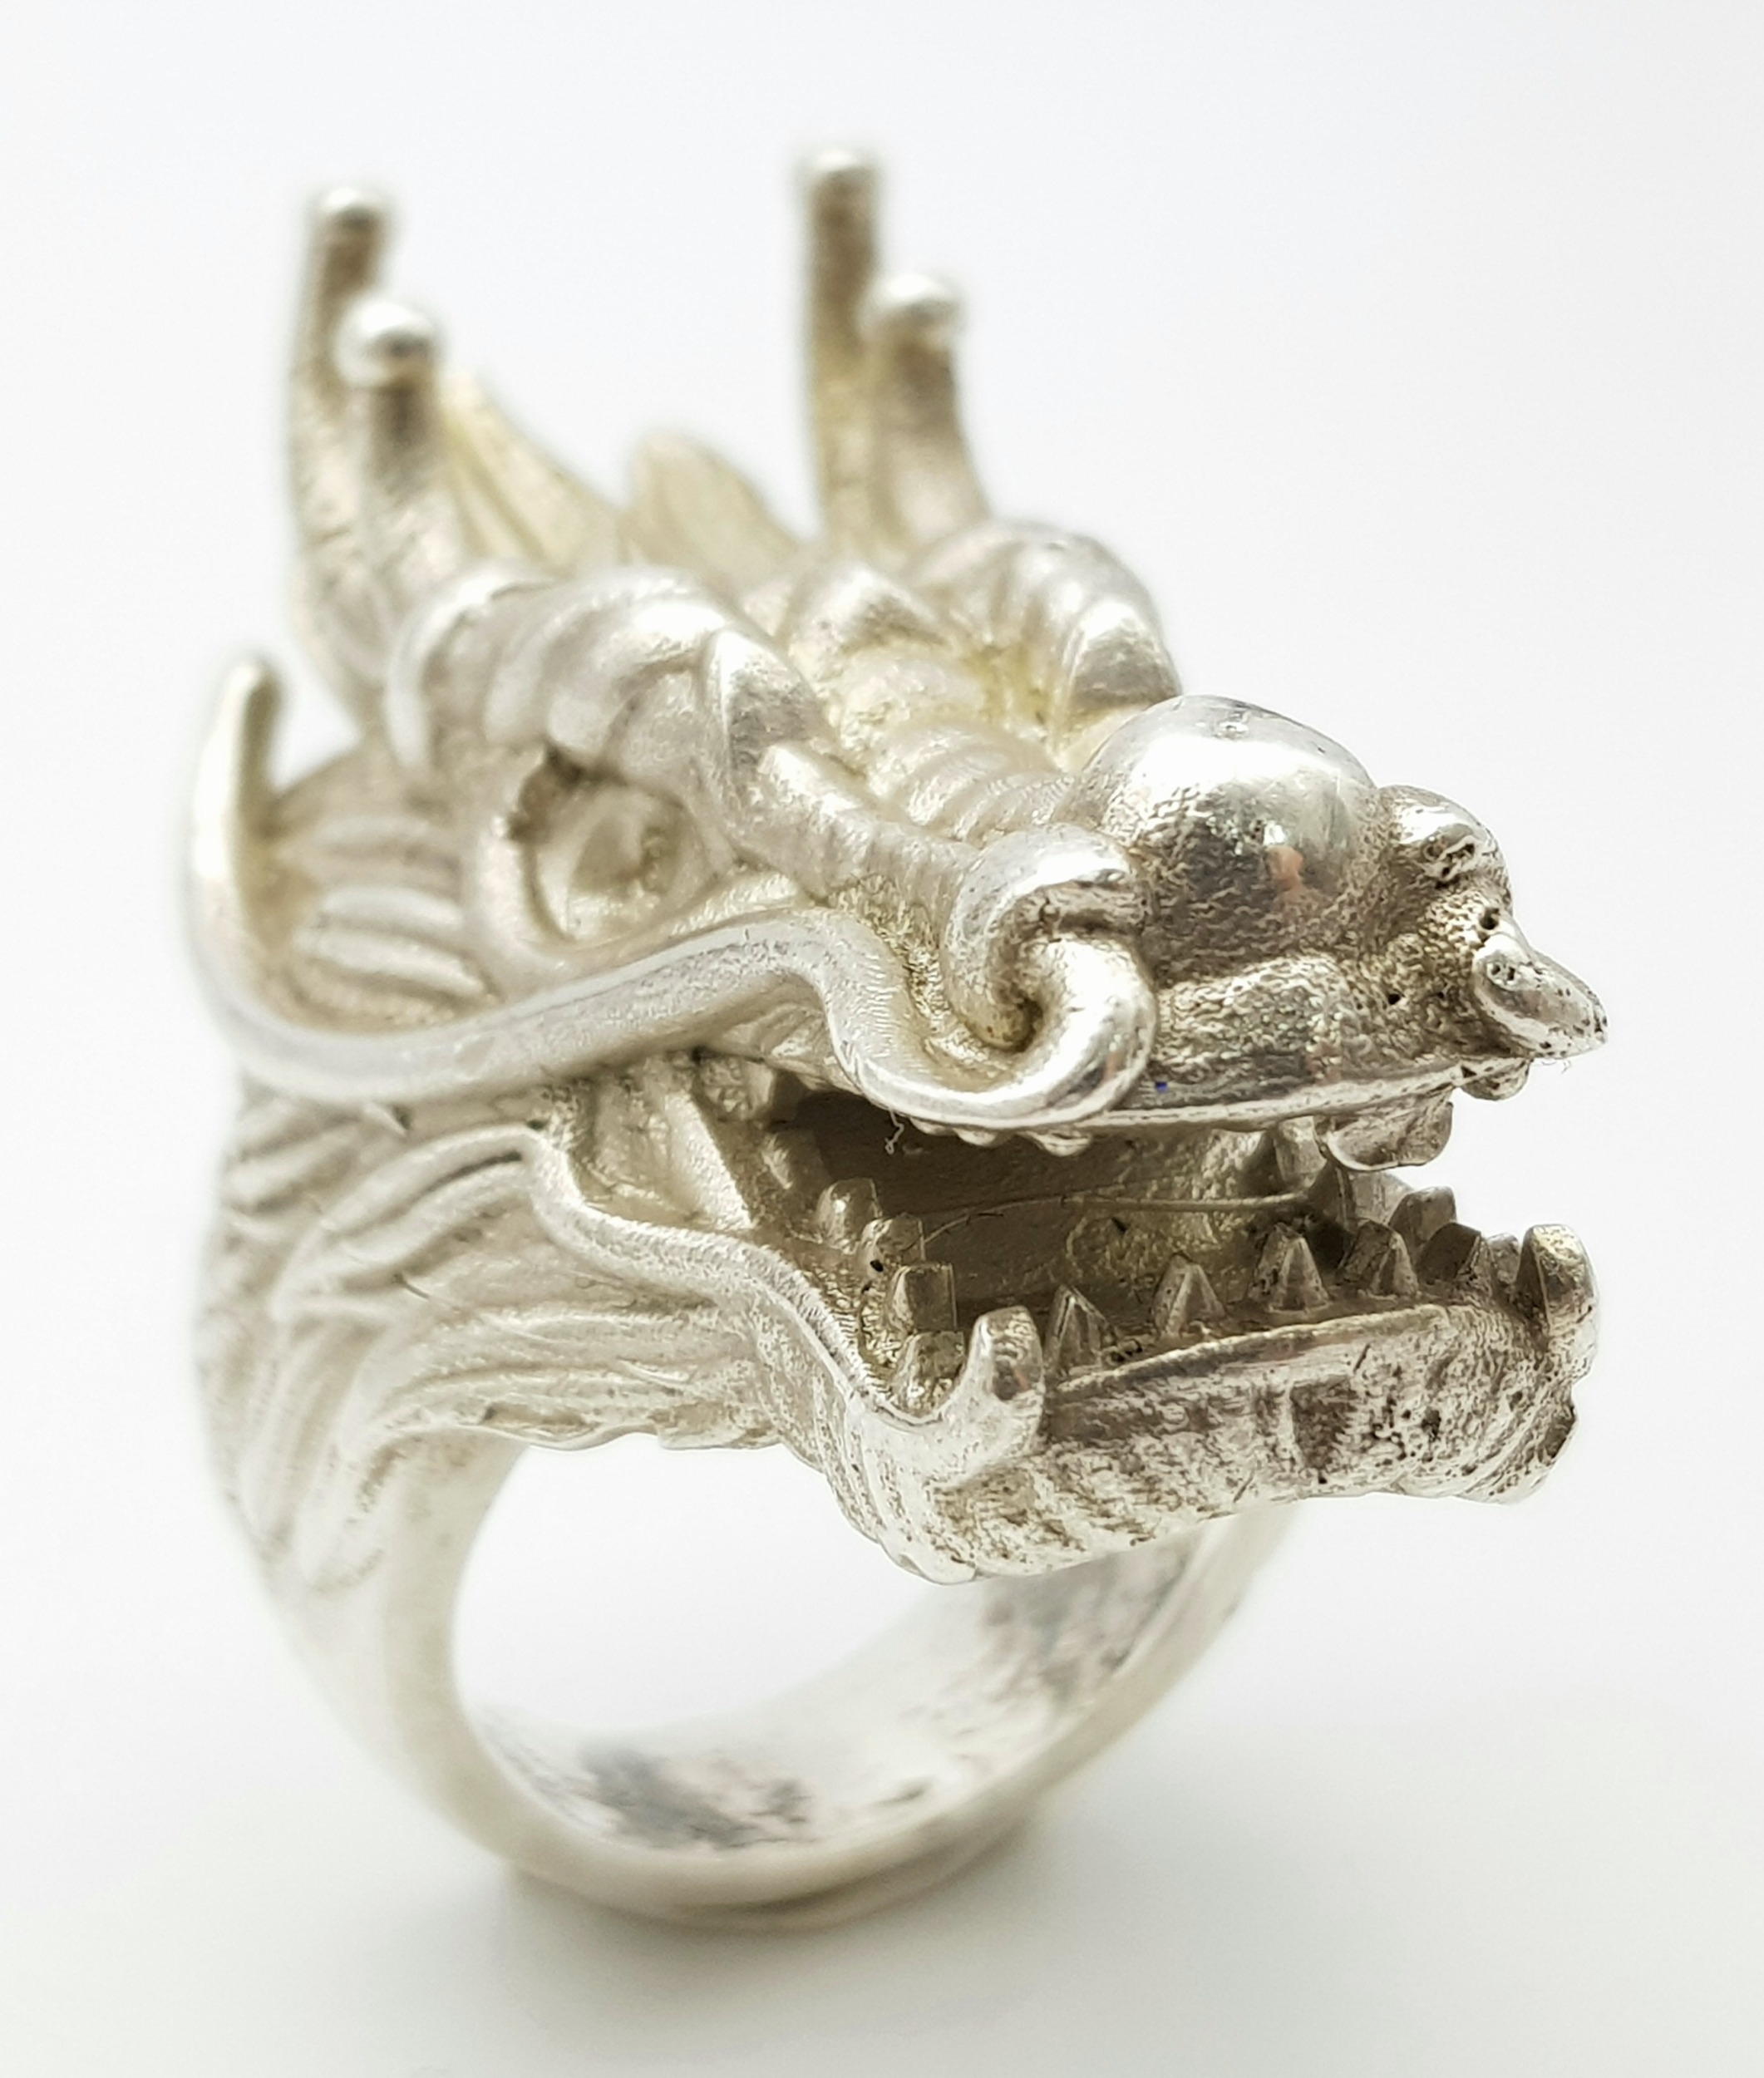 A STERLING SILVER DRAGONS HEAD RING, STUNNING DETAIL AND HEAVY. 4.2cm dragon head length, 86.8g - Image 4 of 6